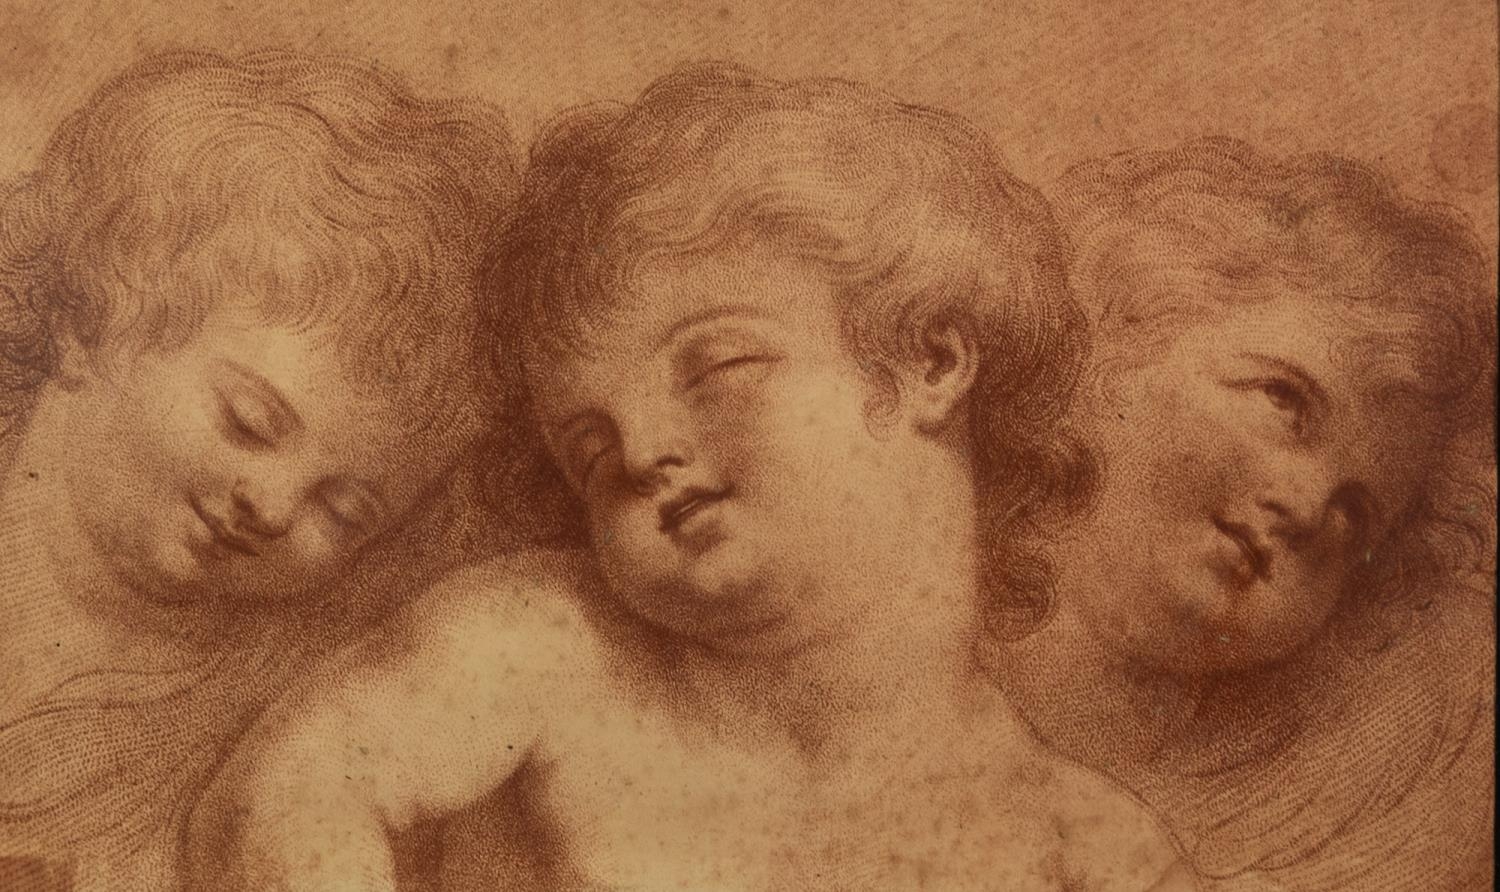 PROBABLY LATE 18th CENTURY STIPPLE ENGRAVING PRINTED IN BISTRE Three cherubic heads Contained in a